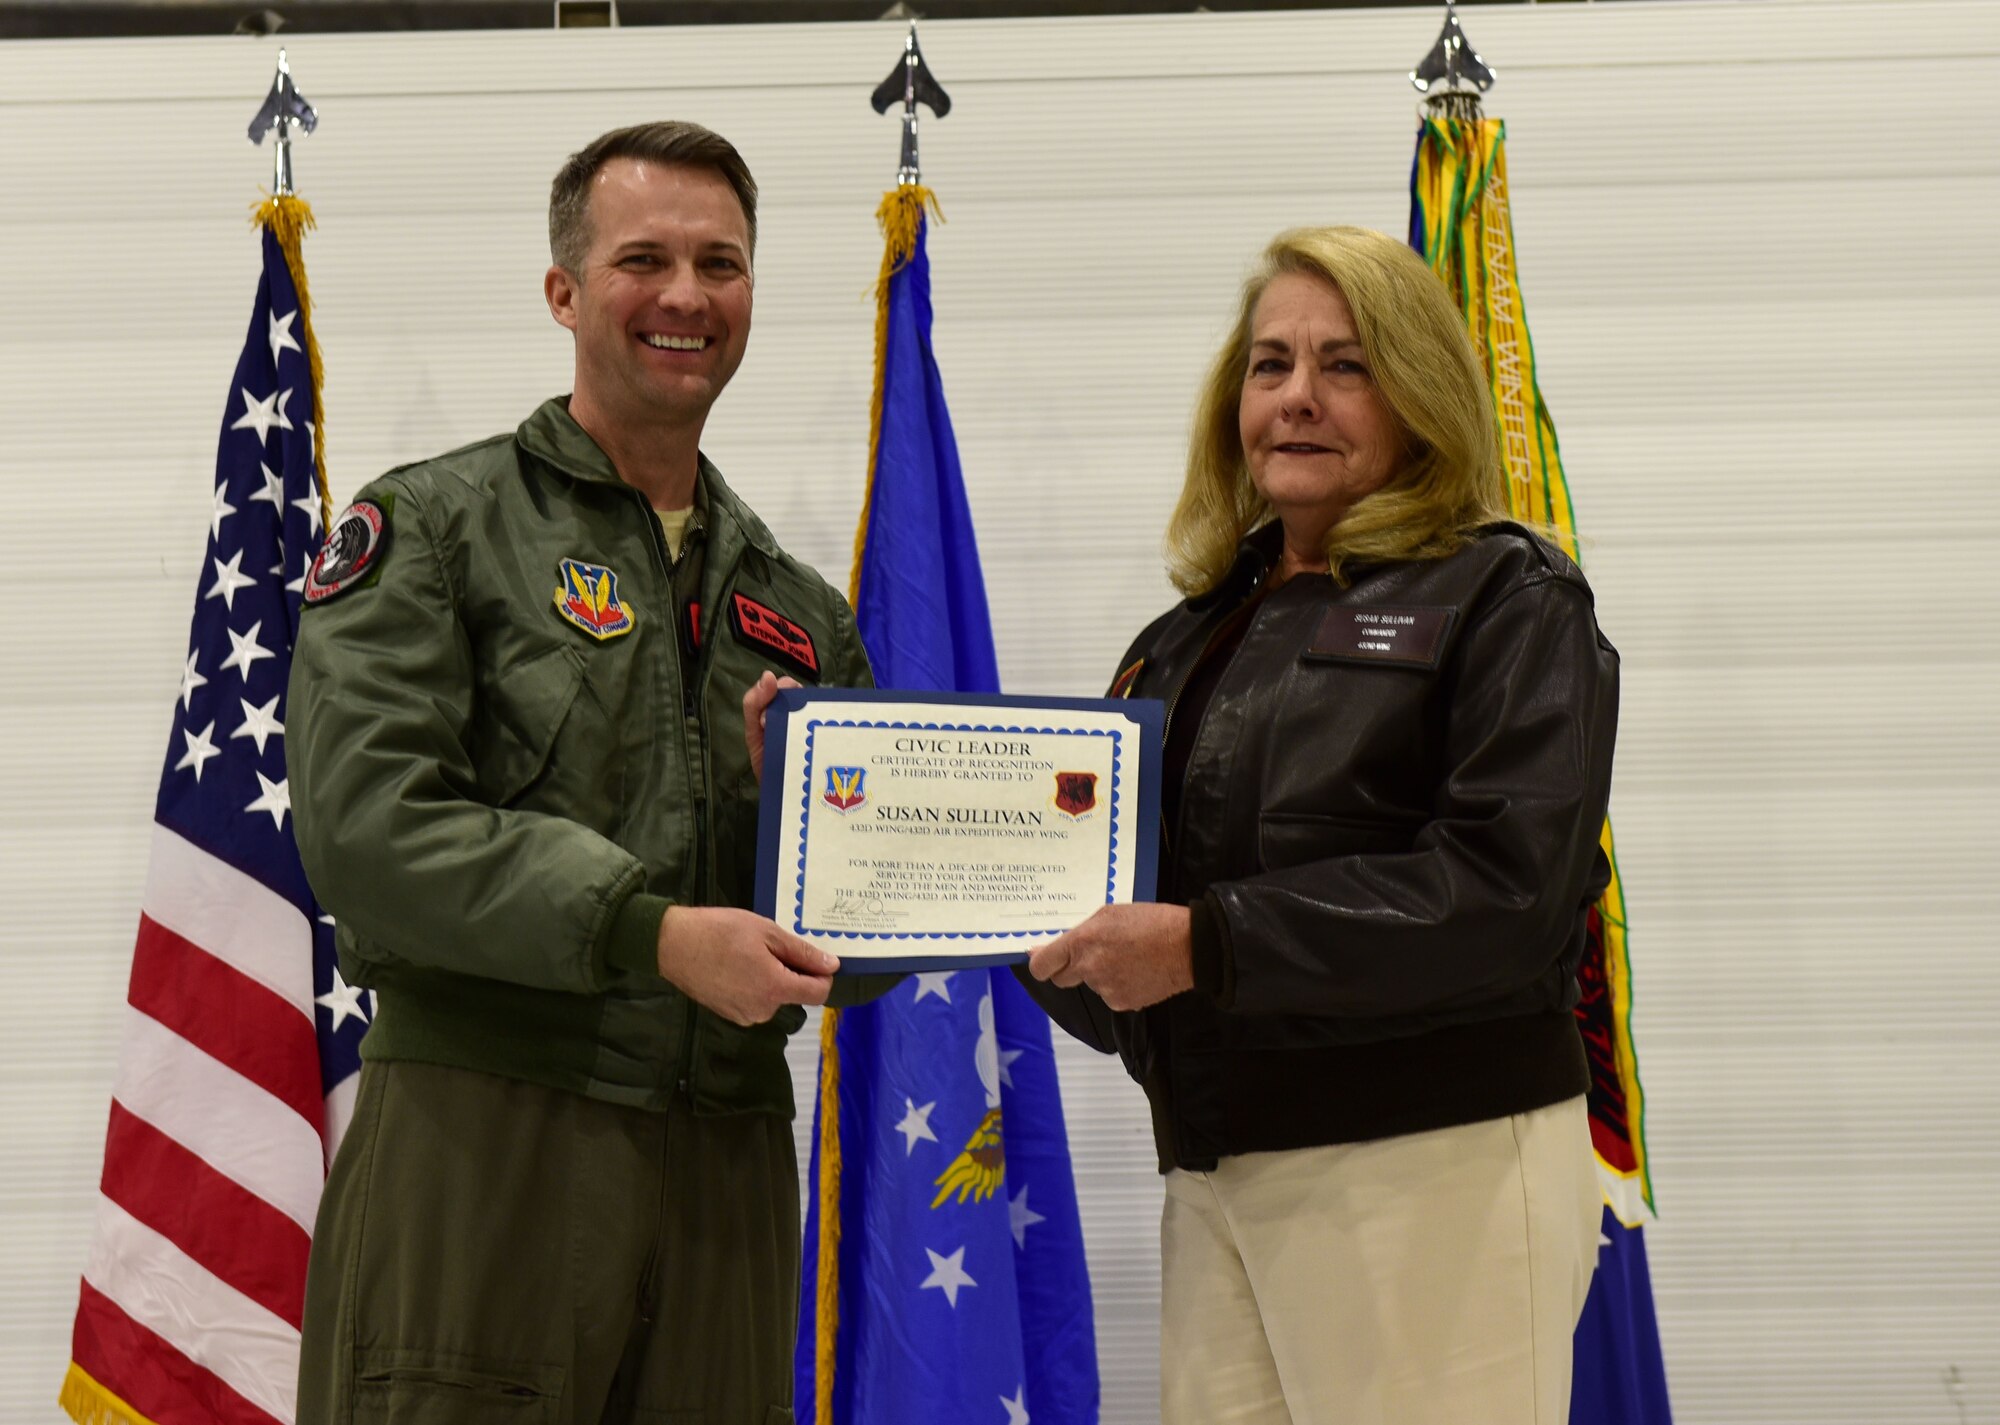 Col. Stephen Jones, 432nd Wing/432nd Air Expeditionary Wing commander, and Susan Sullivan, 432nd WG/432nd AEW civic leader, hold a certificate